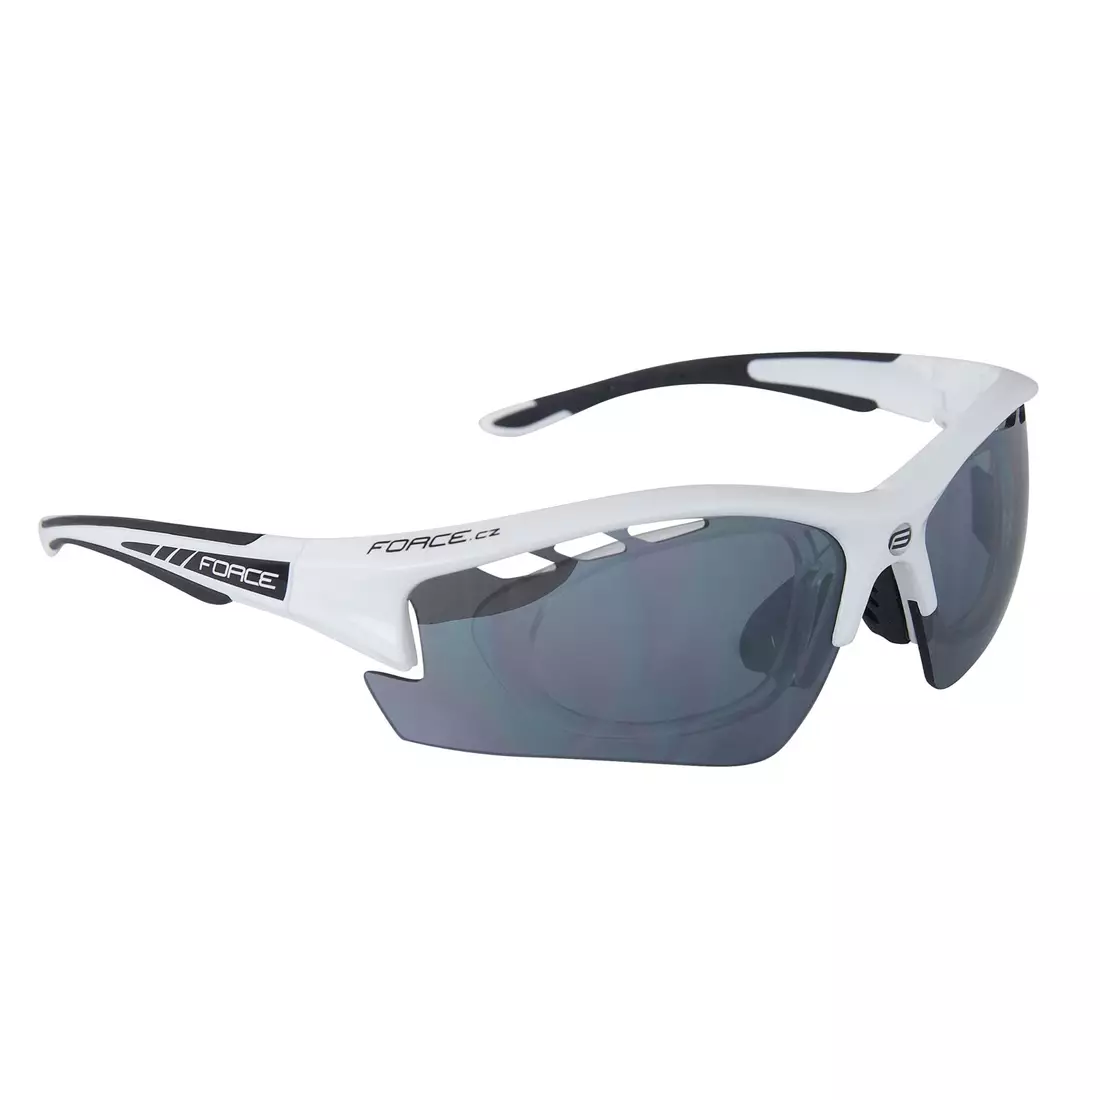 9092225 FORCE RIDE PRO glasses with replaceable lenses + correction white